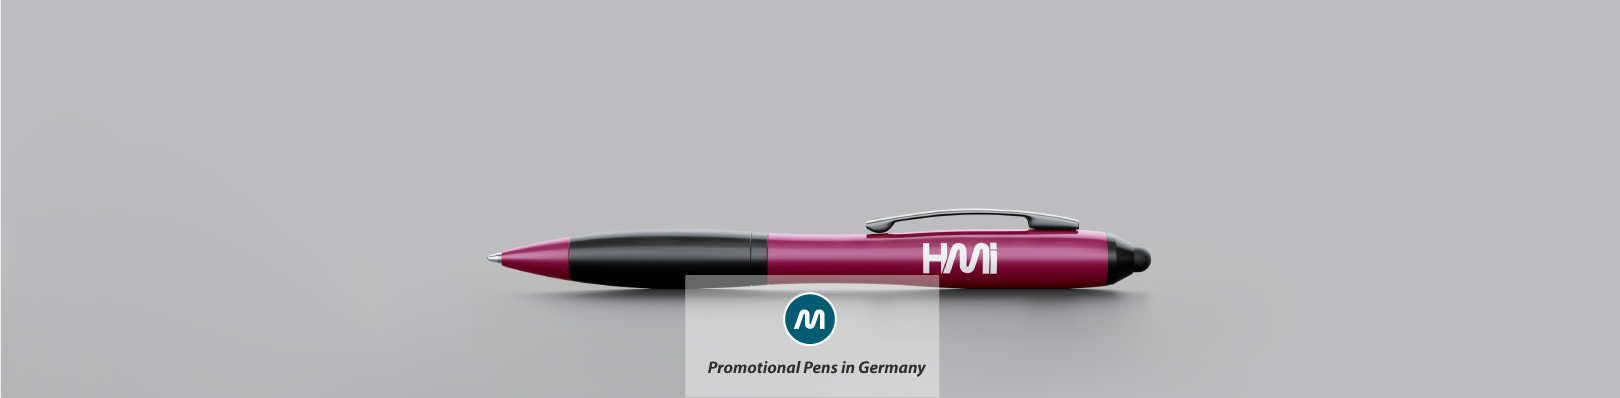 Custom pens in Germany banners | Custom pen printed with logo in Germany with HMi GmbH | HMi offers promotional pens in Germany with branding option